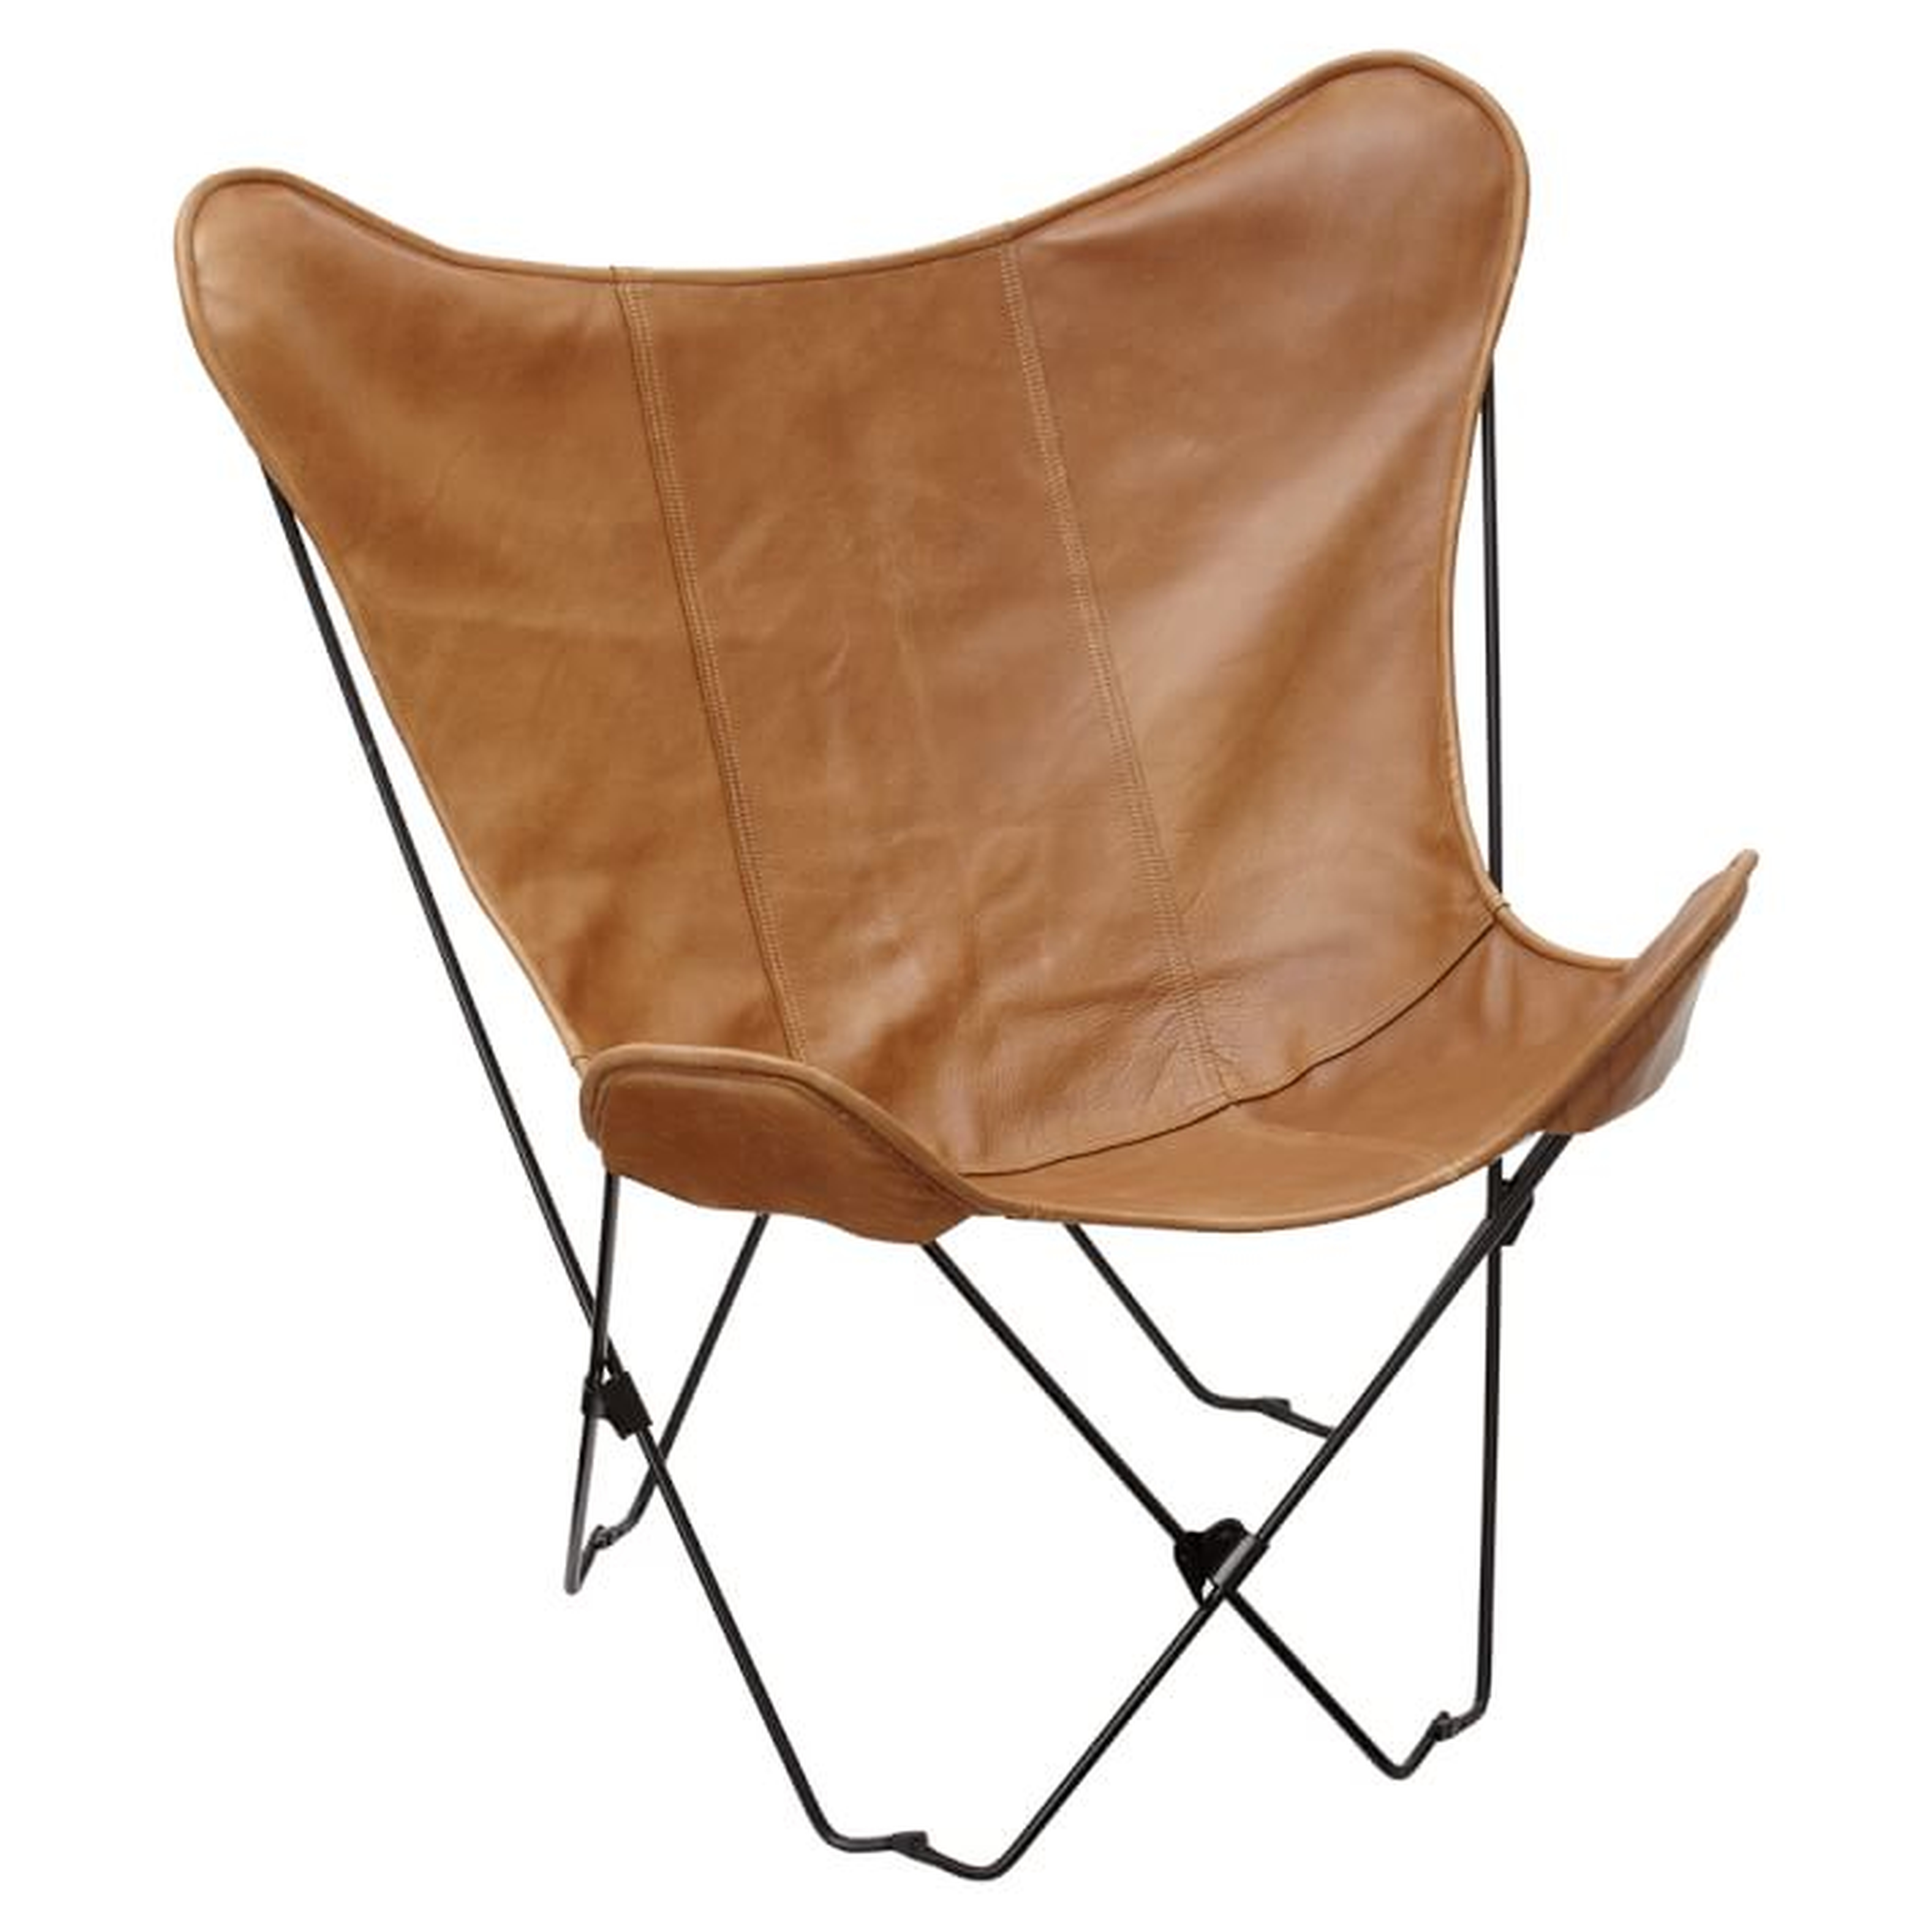 Leather Sling Butterfly Chair - Pottery Barn Teen